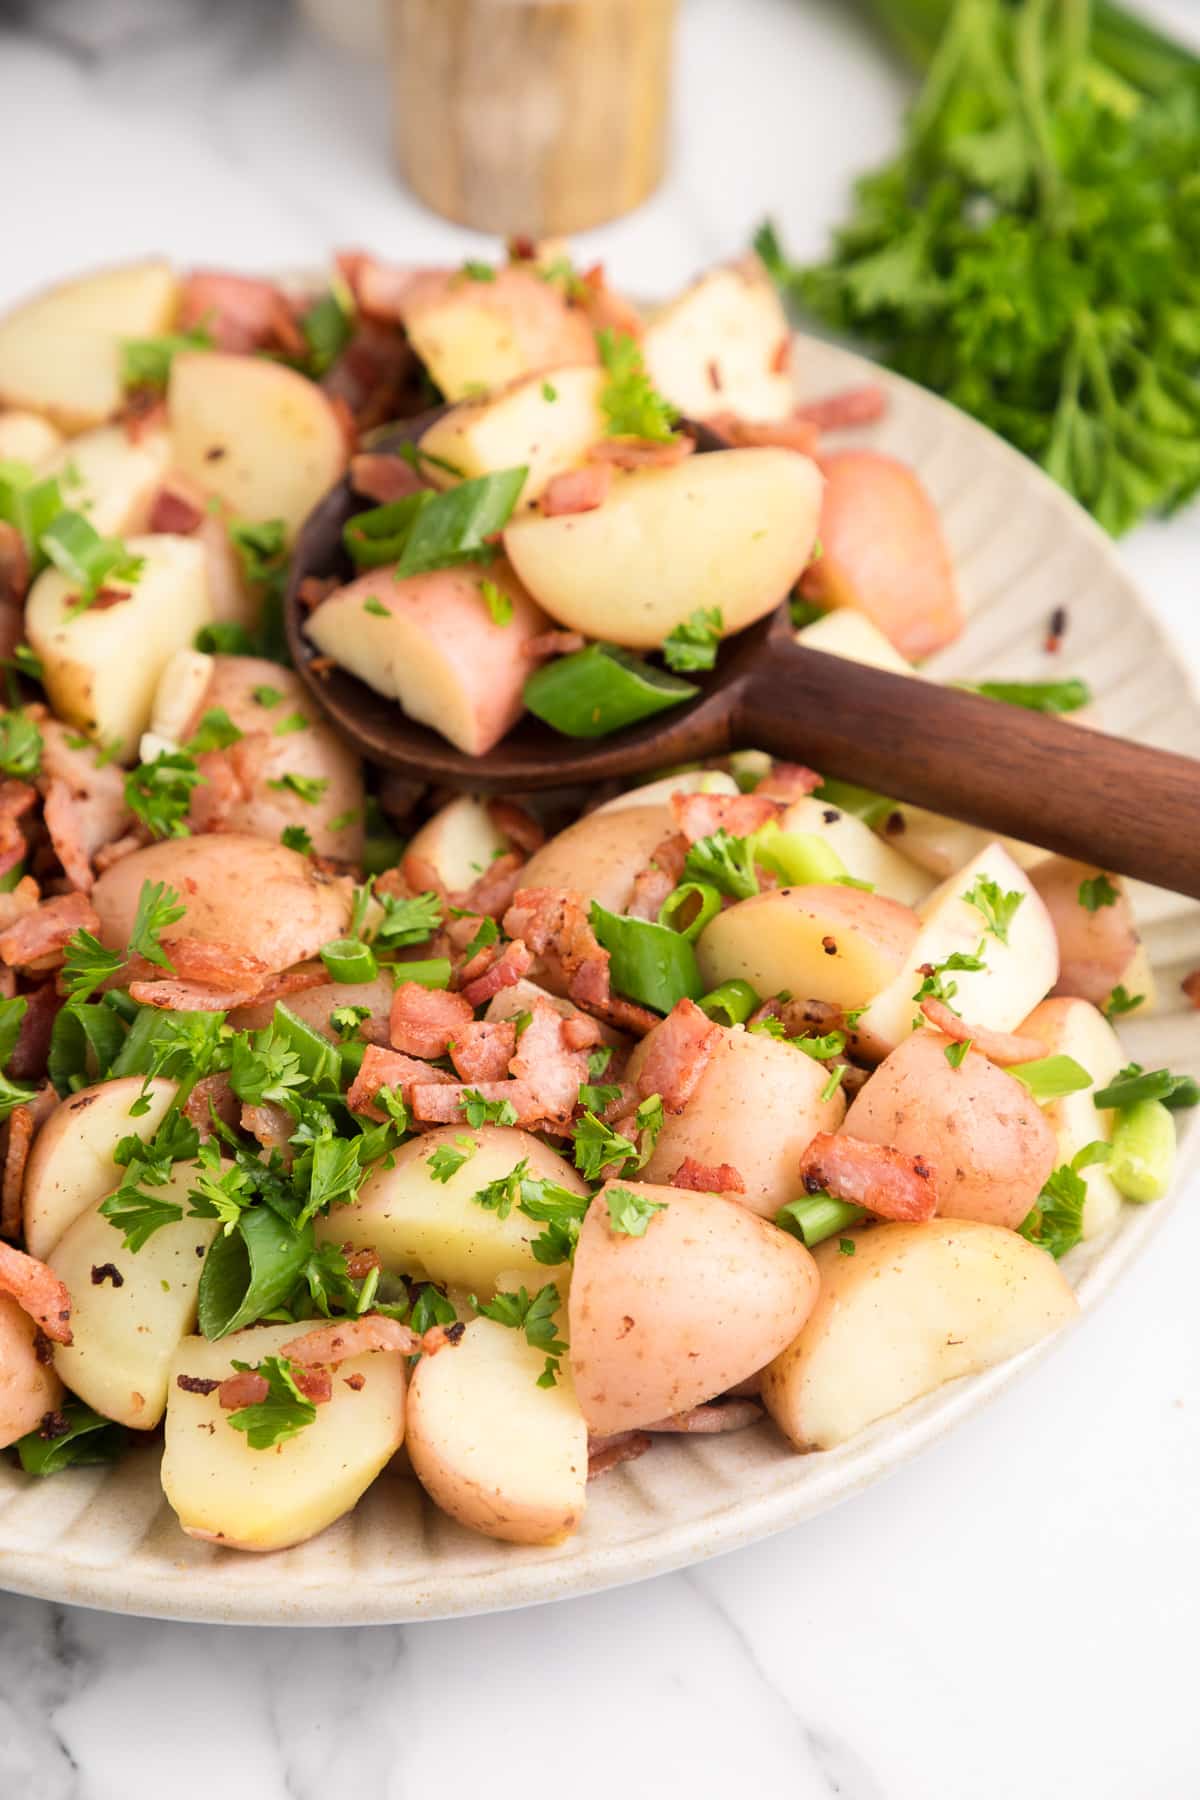 Close up of a platter full of warm german potato salad being scooped with a spoon topped with bacon, parsley and green onion pieces.